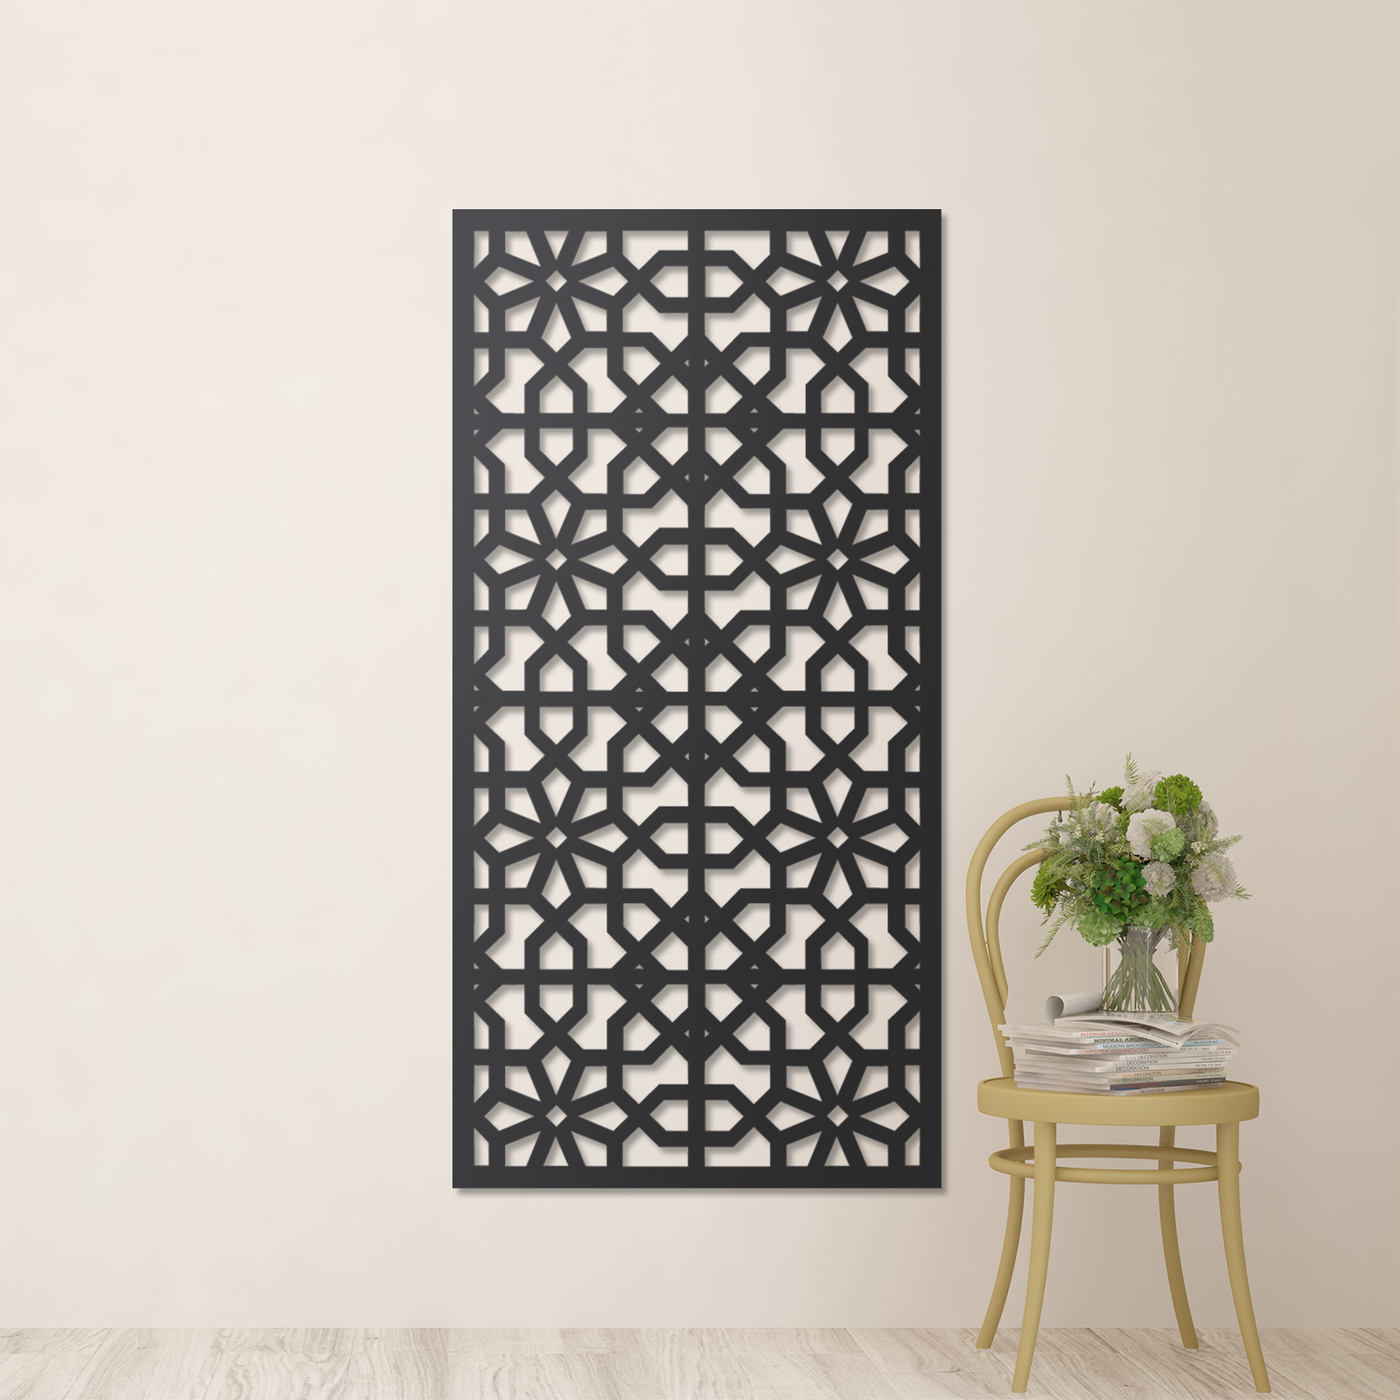 Mushi Mushi Metal Screen: The Perfect Way to Keep Your Garden Private and Stylish